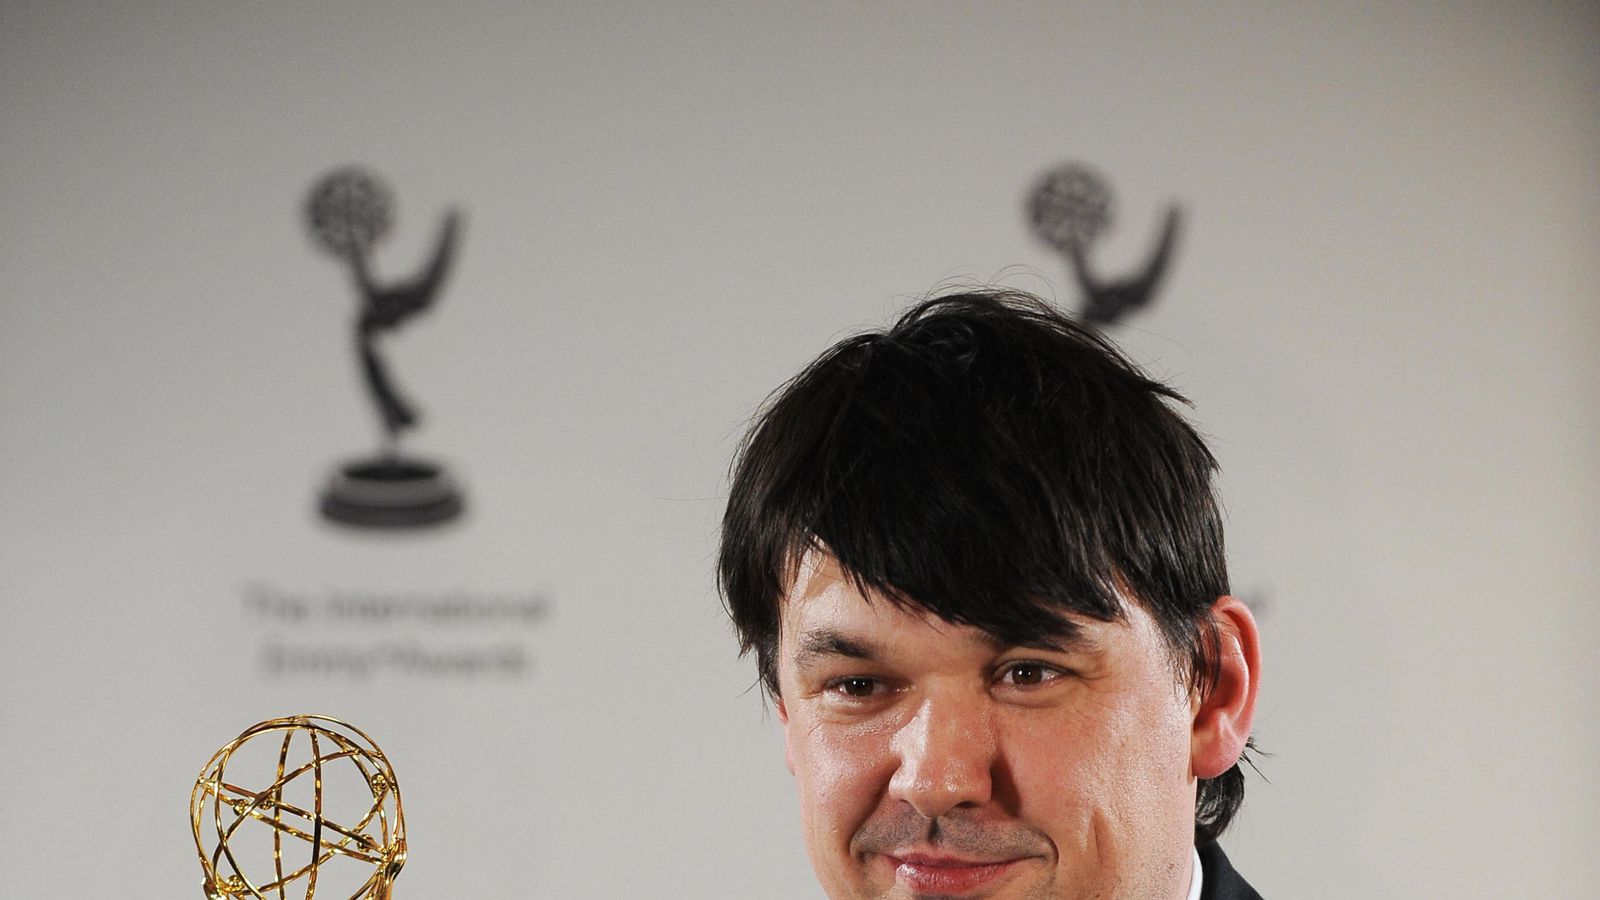 Father Ted creator Graham Linehan now 'cancer free' | Ents ...